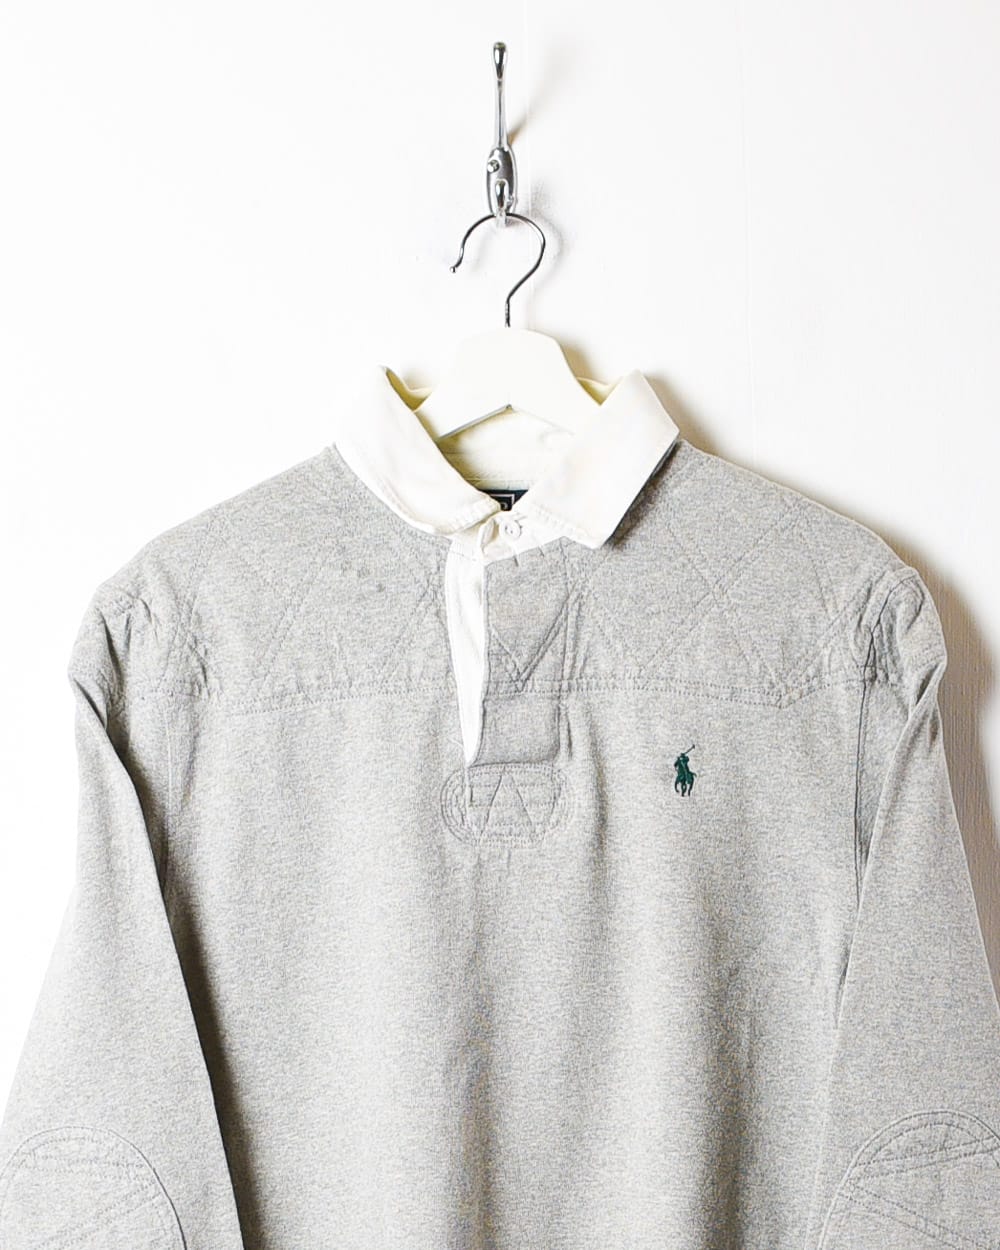 Stone Polo Ralph Lauren Rugby Shirt - Large